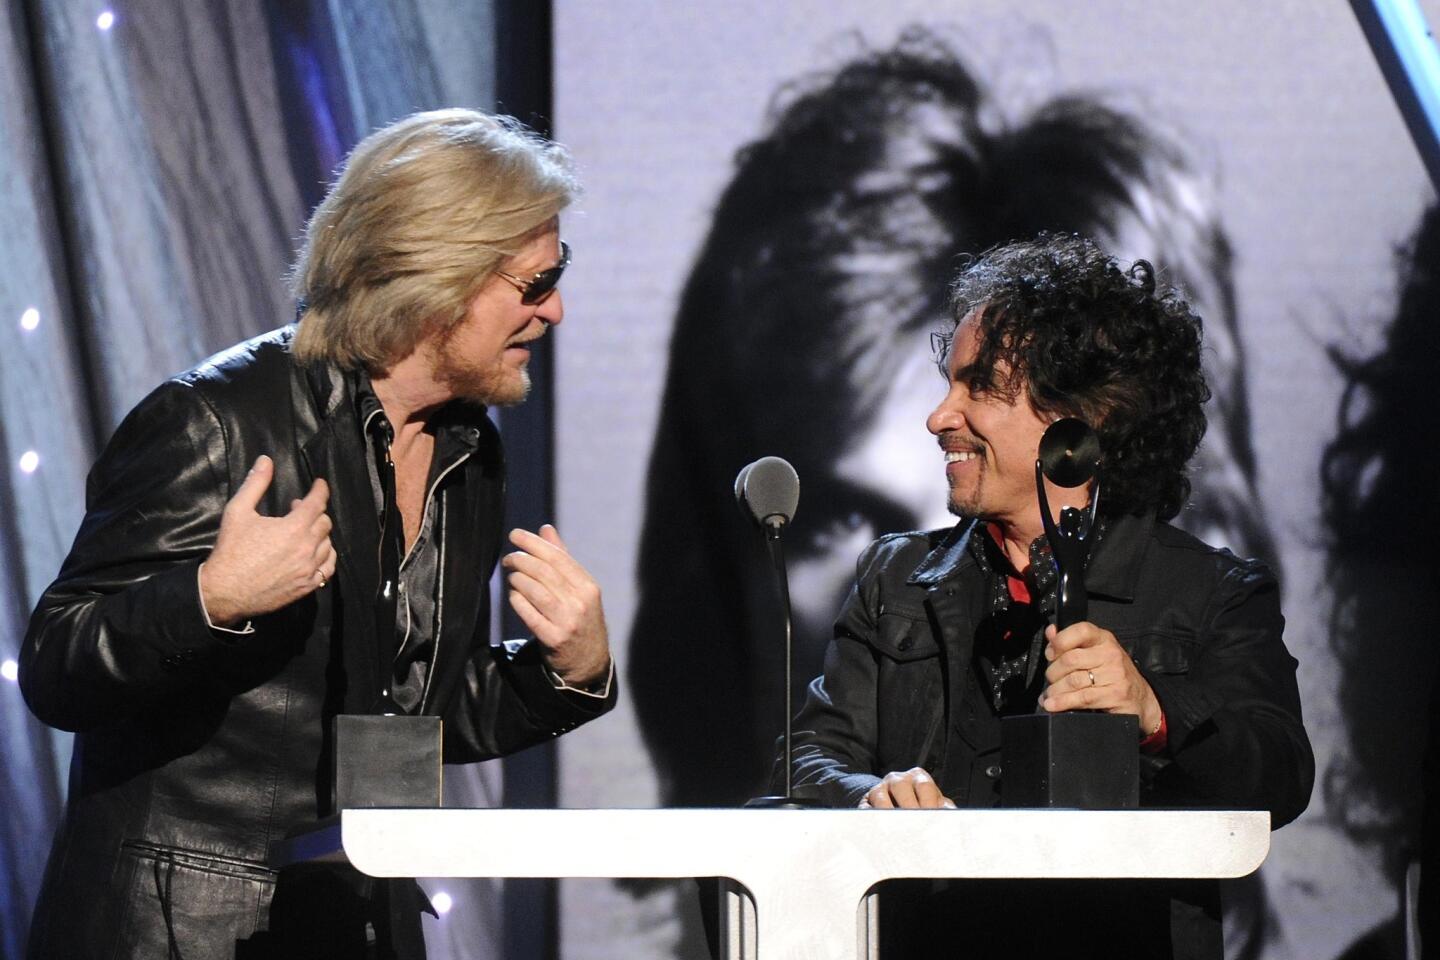 29th Rock and Roll Hall of Fame Induction Ceremony